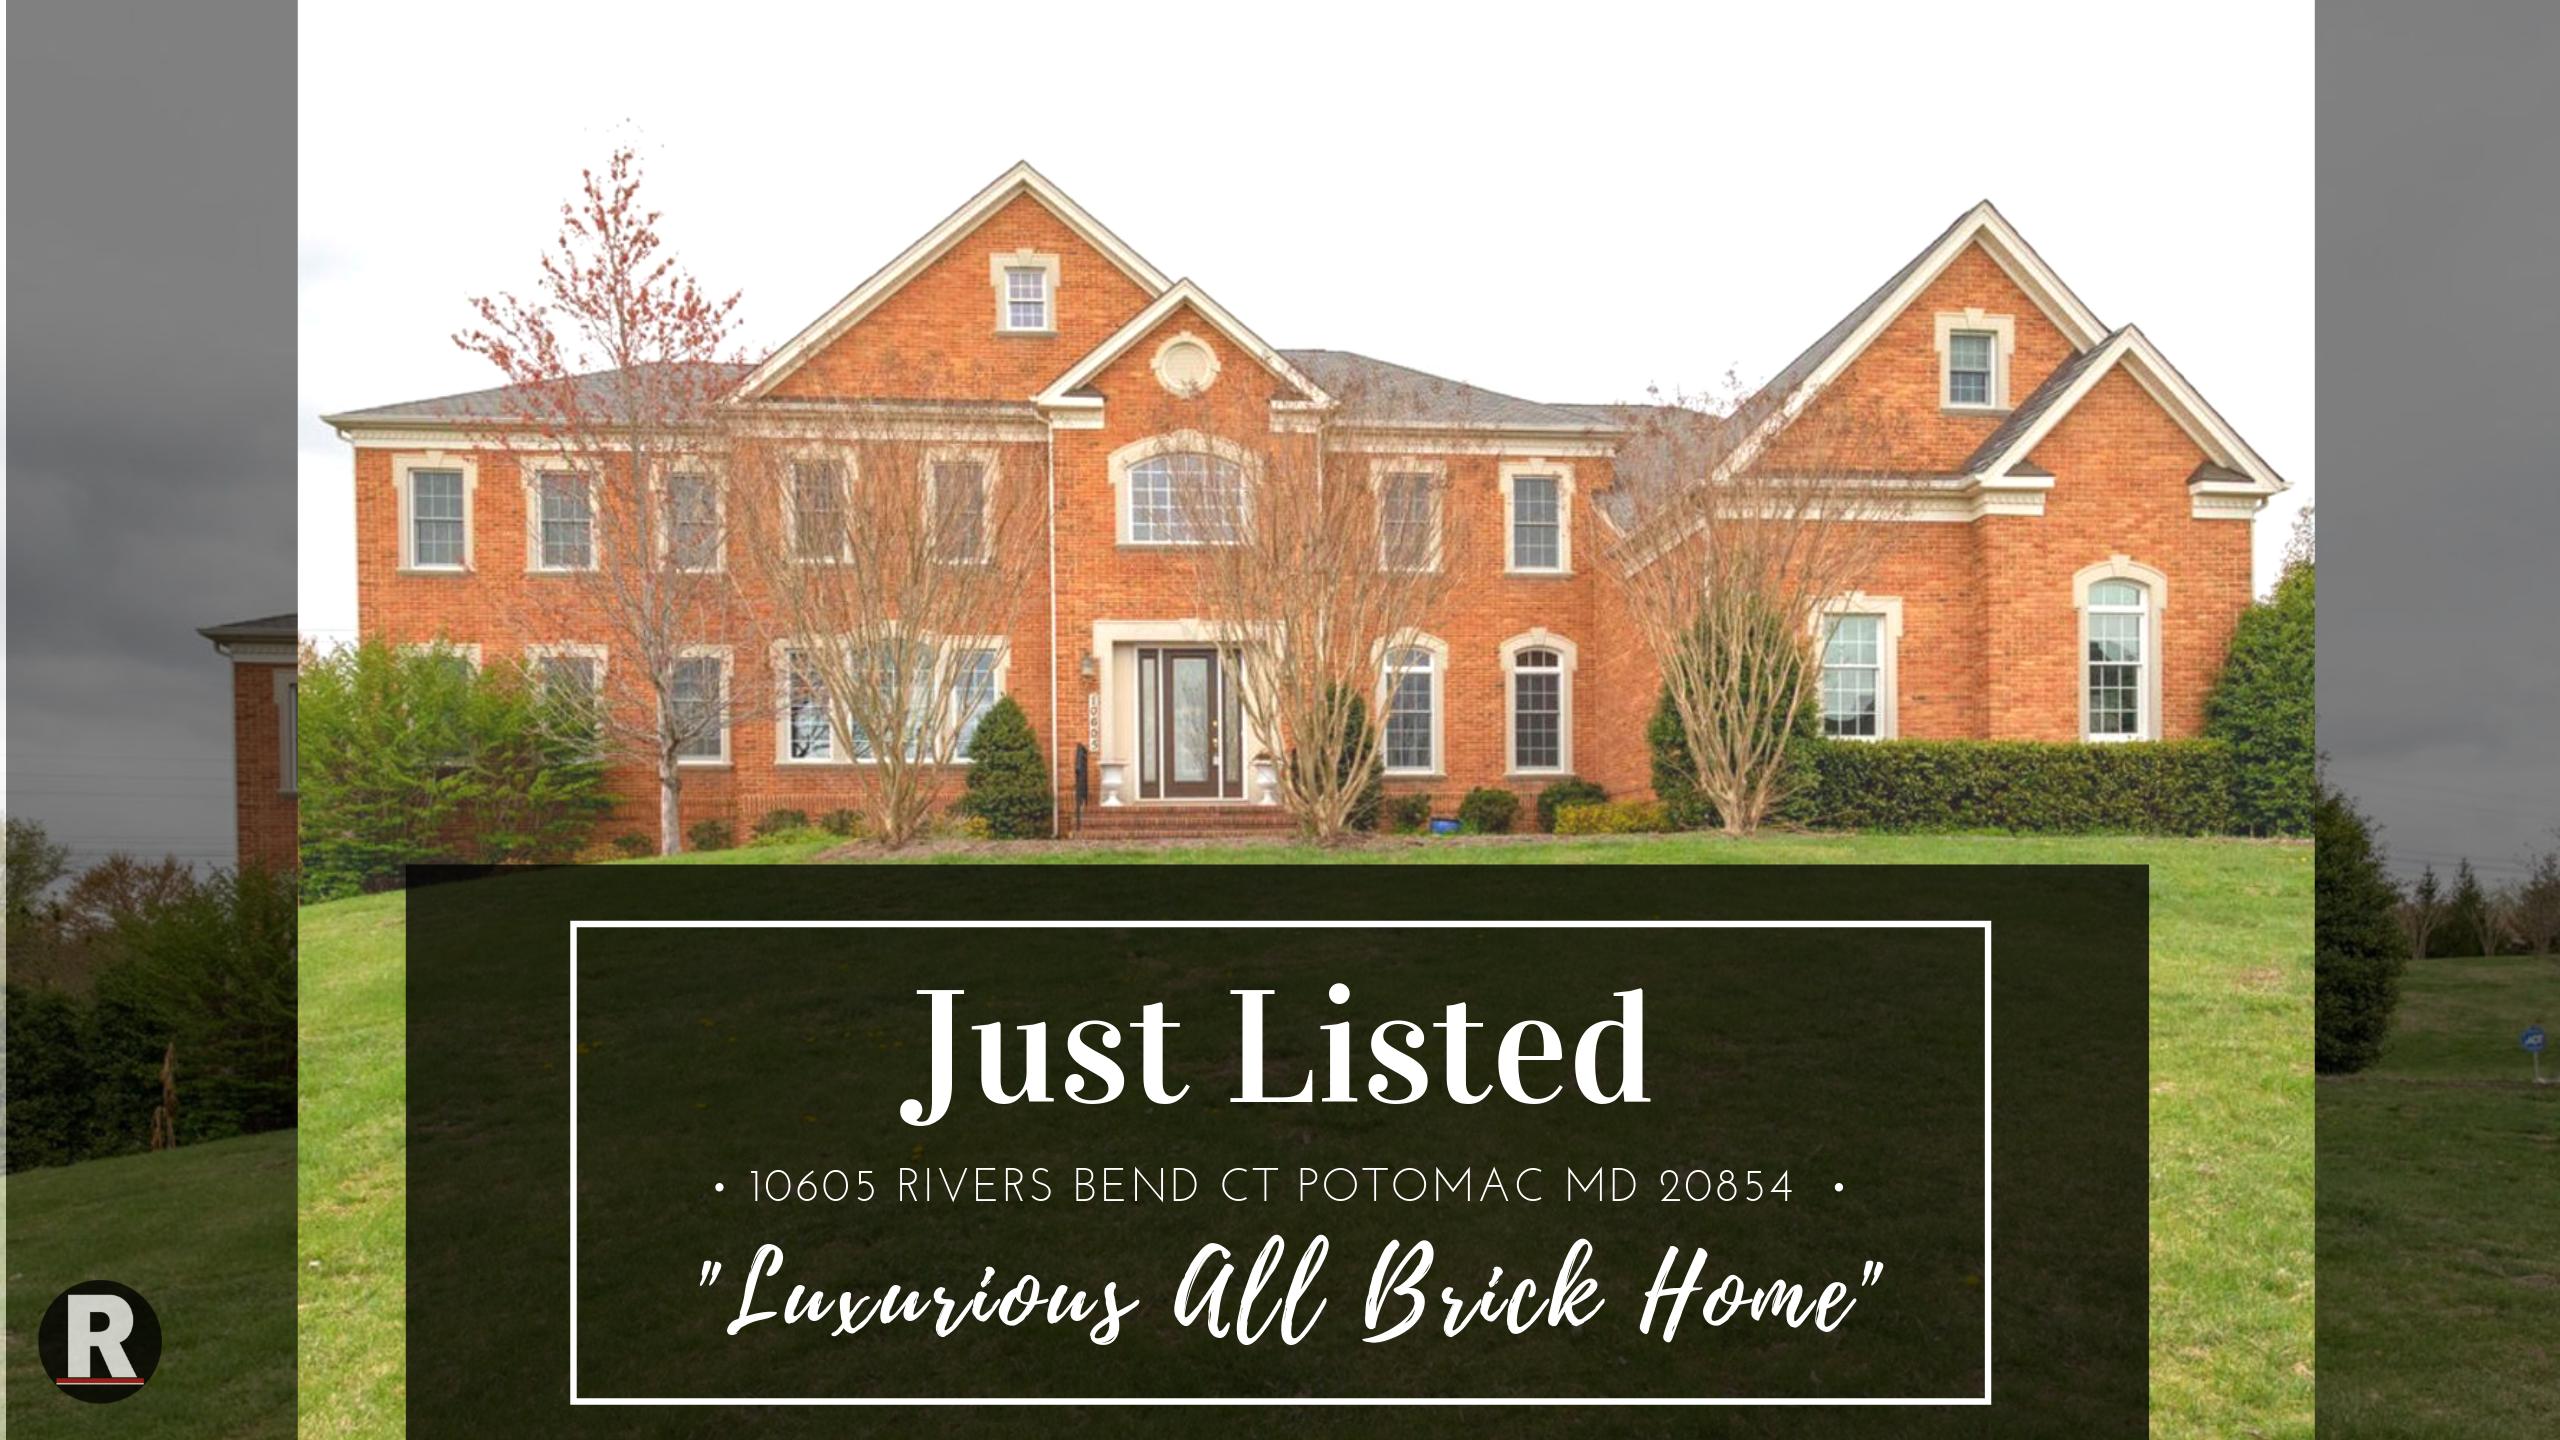 Just Listed! 10605 Rivers Bend Ct Potomac MD 20854